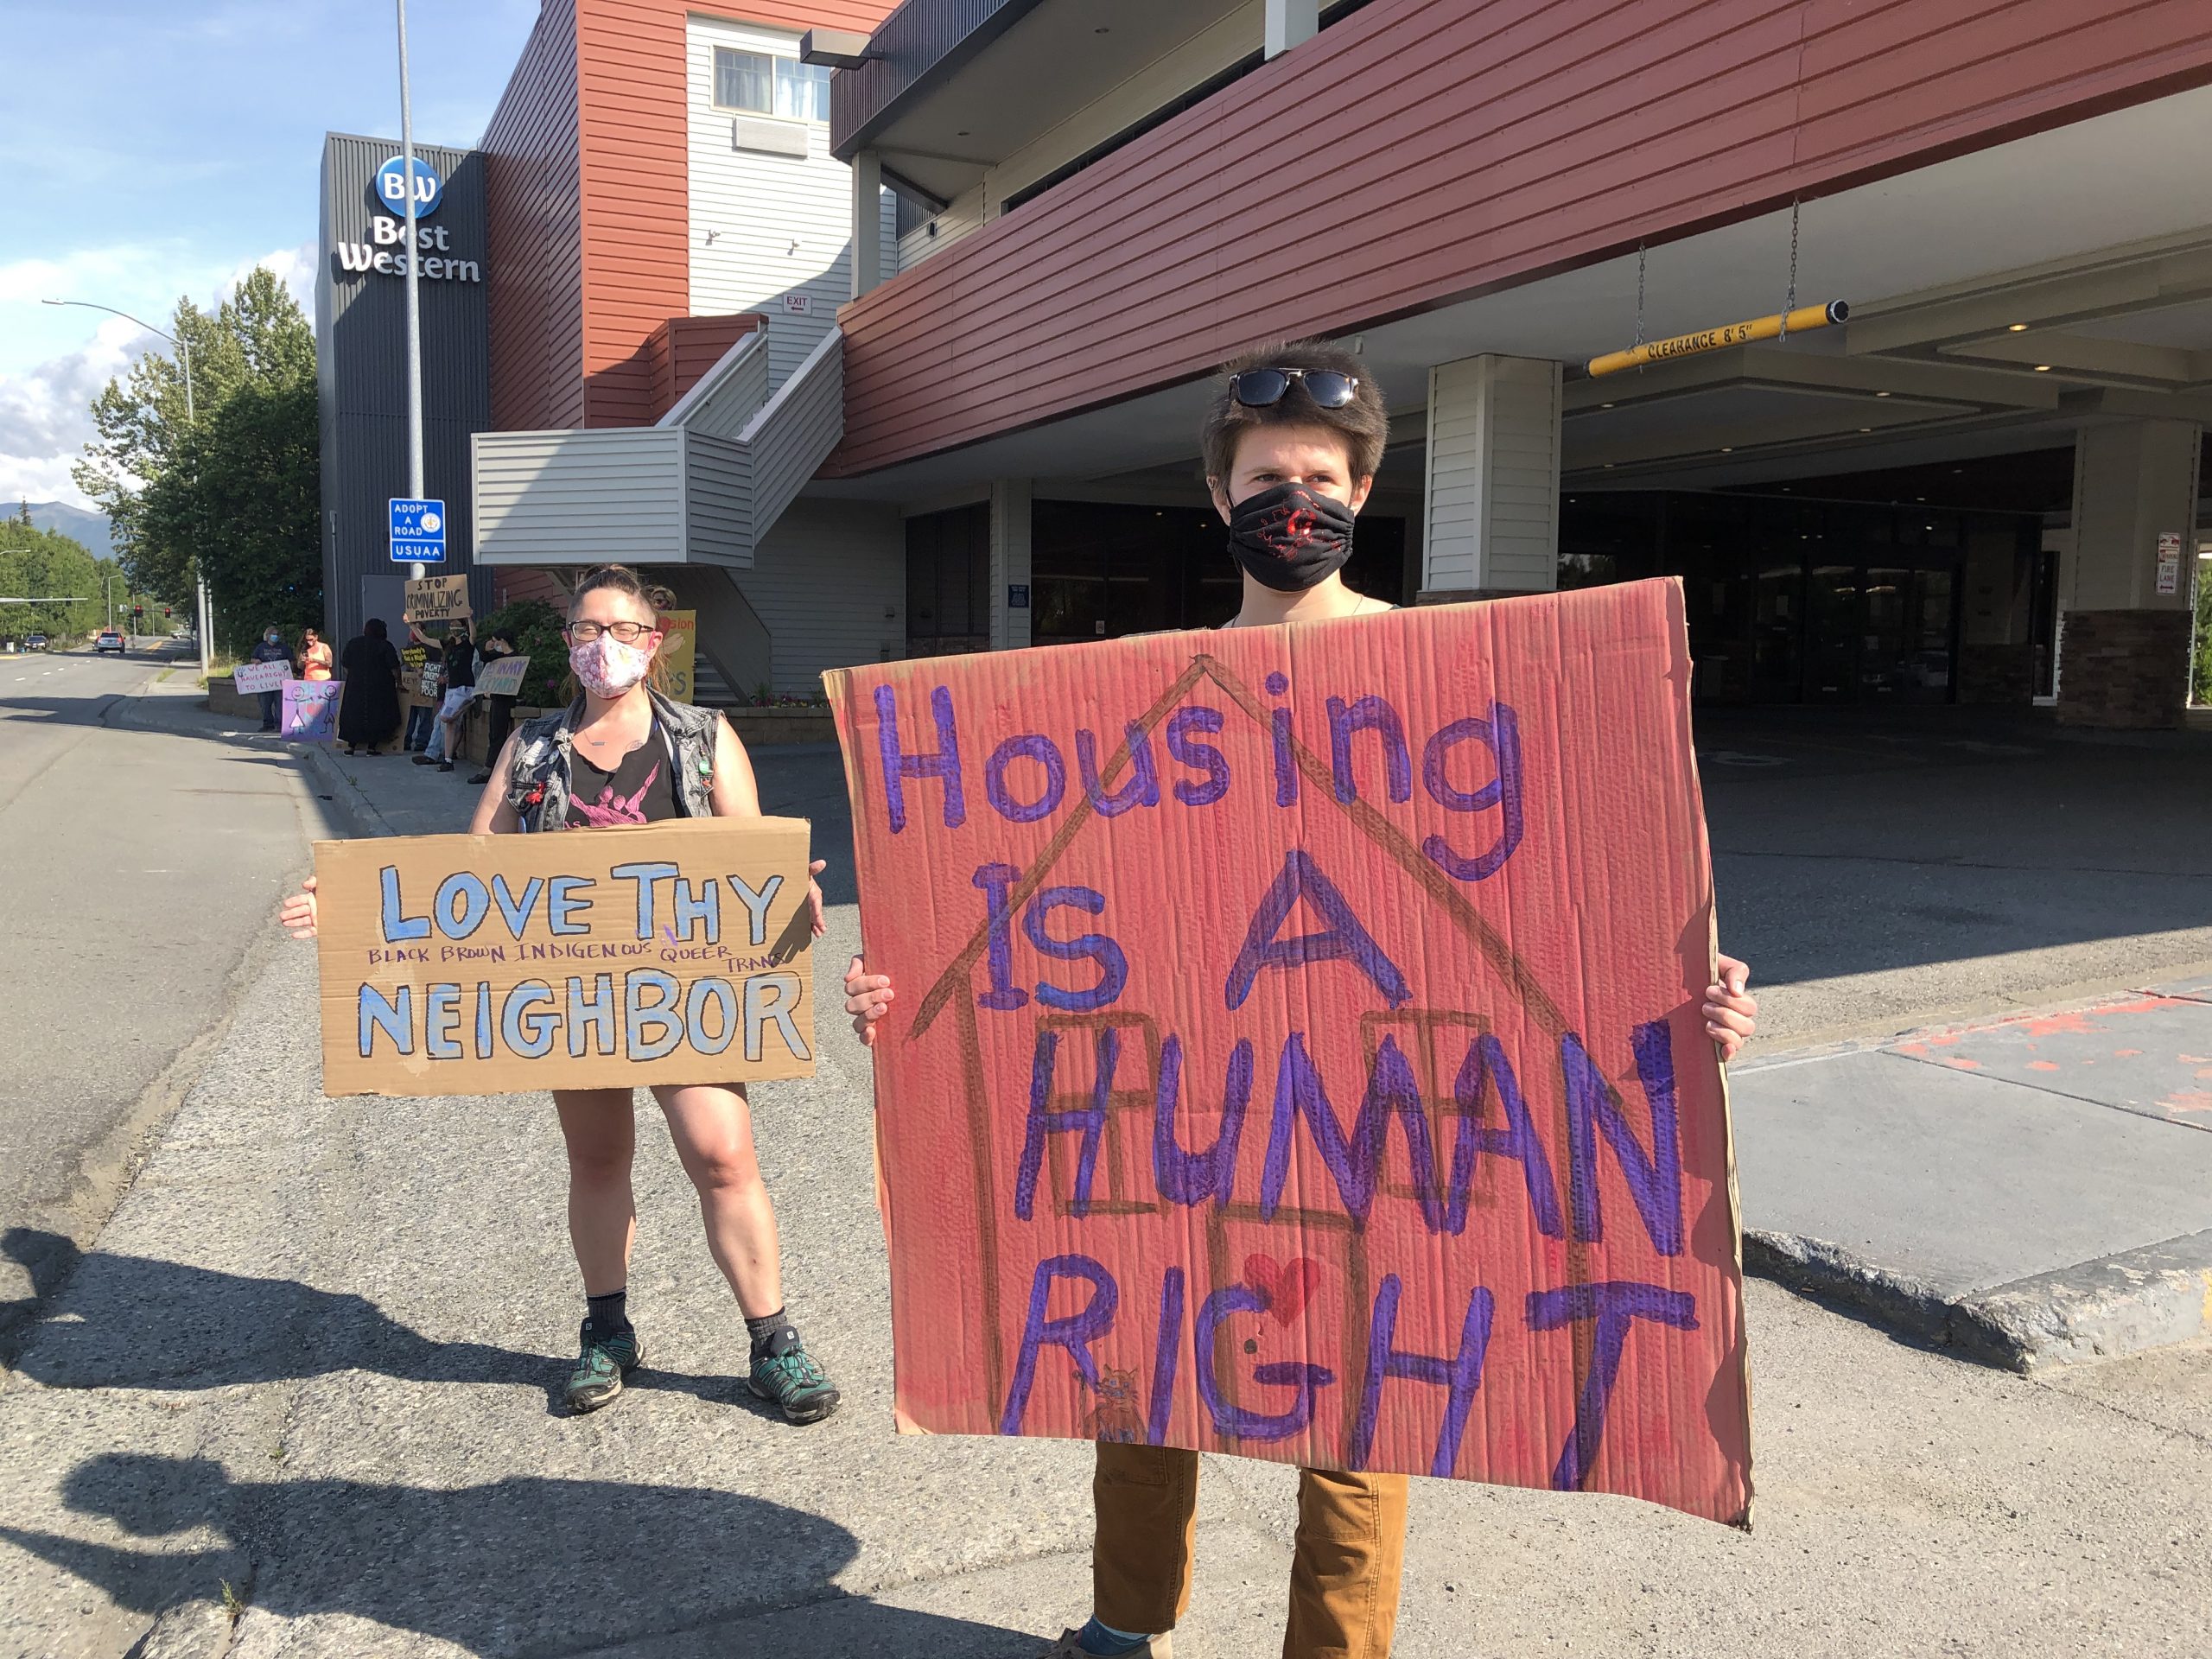 Two people wearing masks hold protest signs on a sidewalk in front of the Best Western Golden Lion. One sign says "Love thy neighbor," and the other says "Housing is a human right."